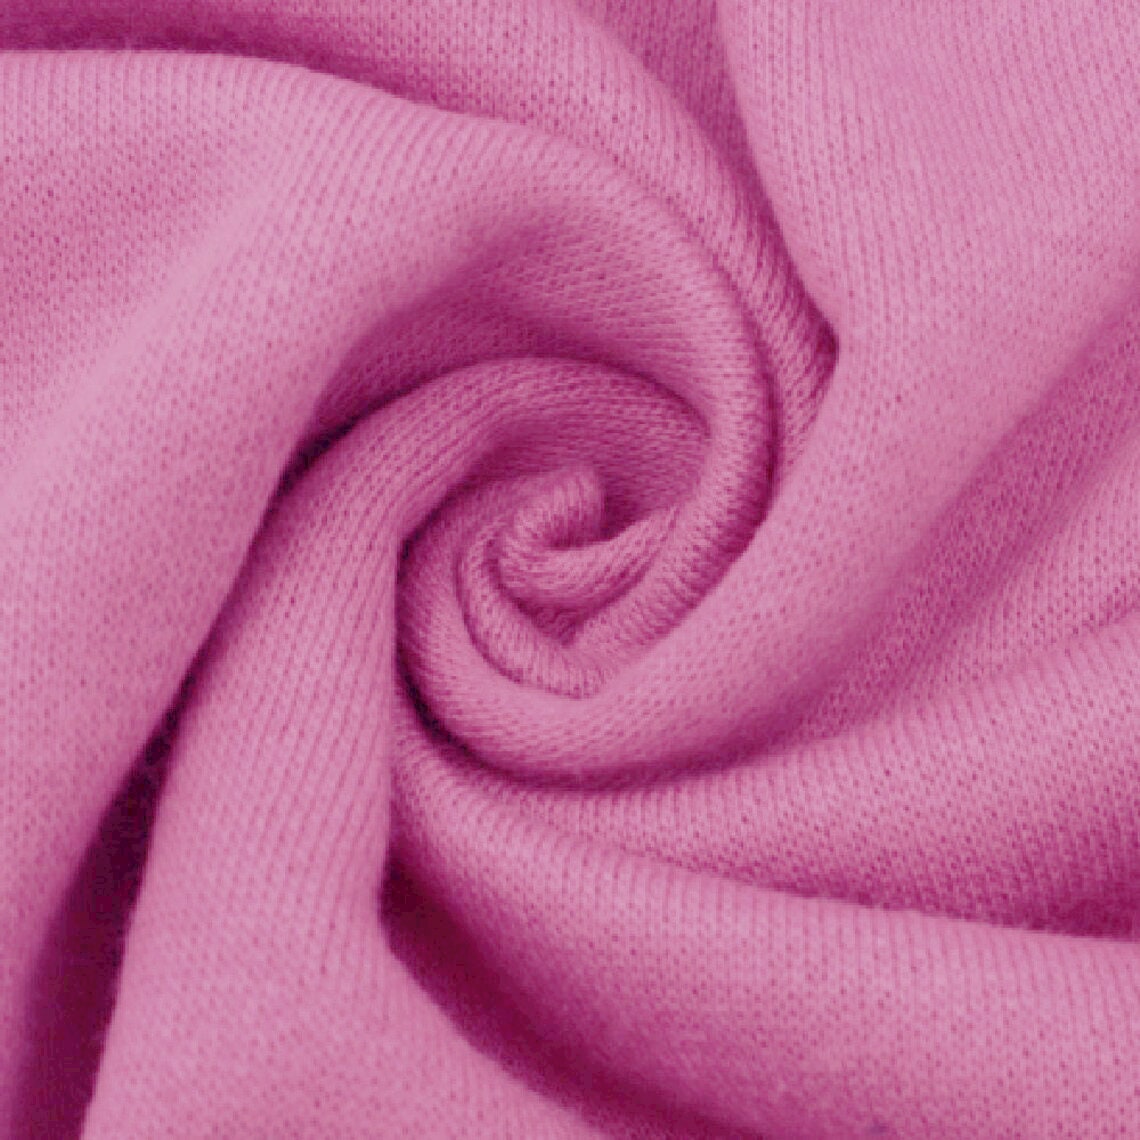  Pink Fleece Fabric - by The Yard : Arts, Crafts & Sewing